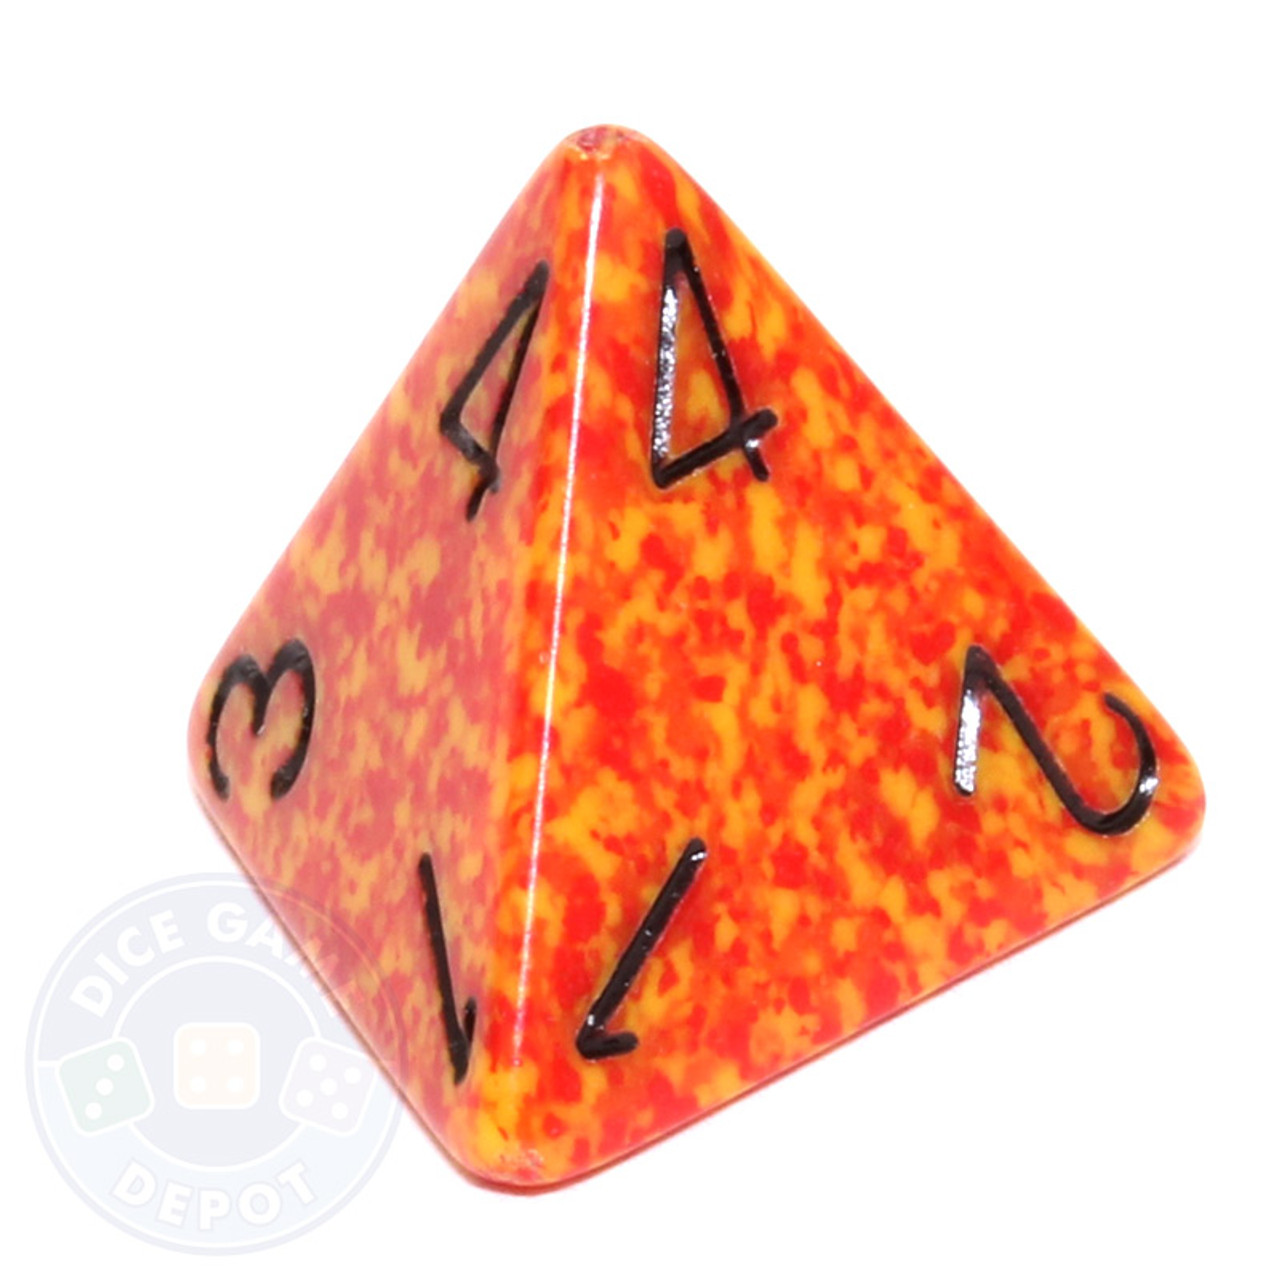 Four-sided die - Wikipedia